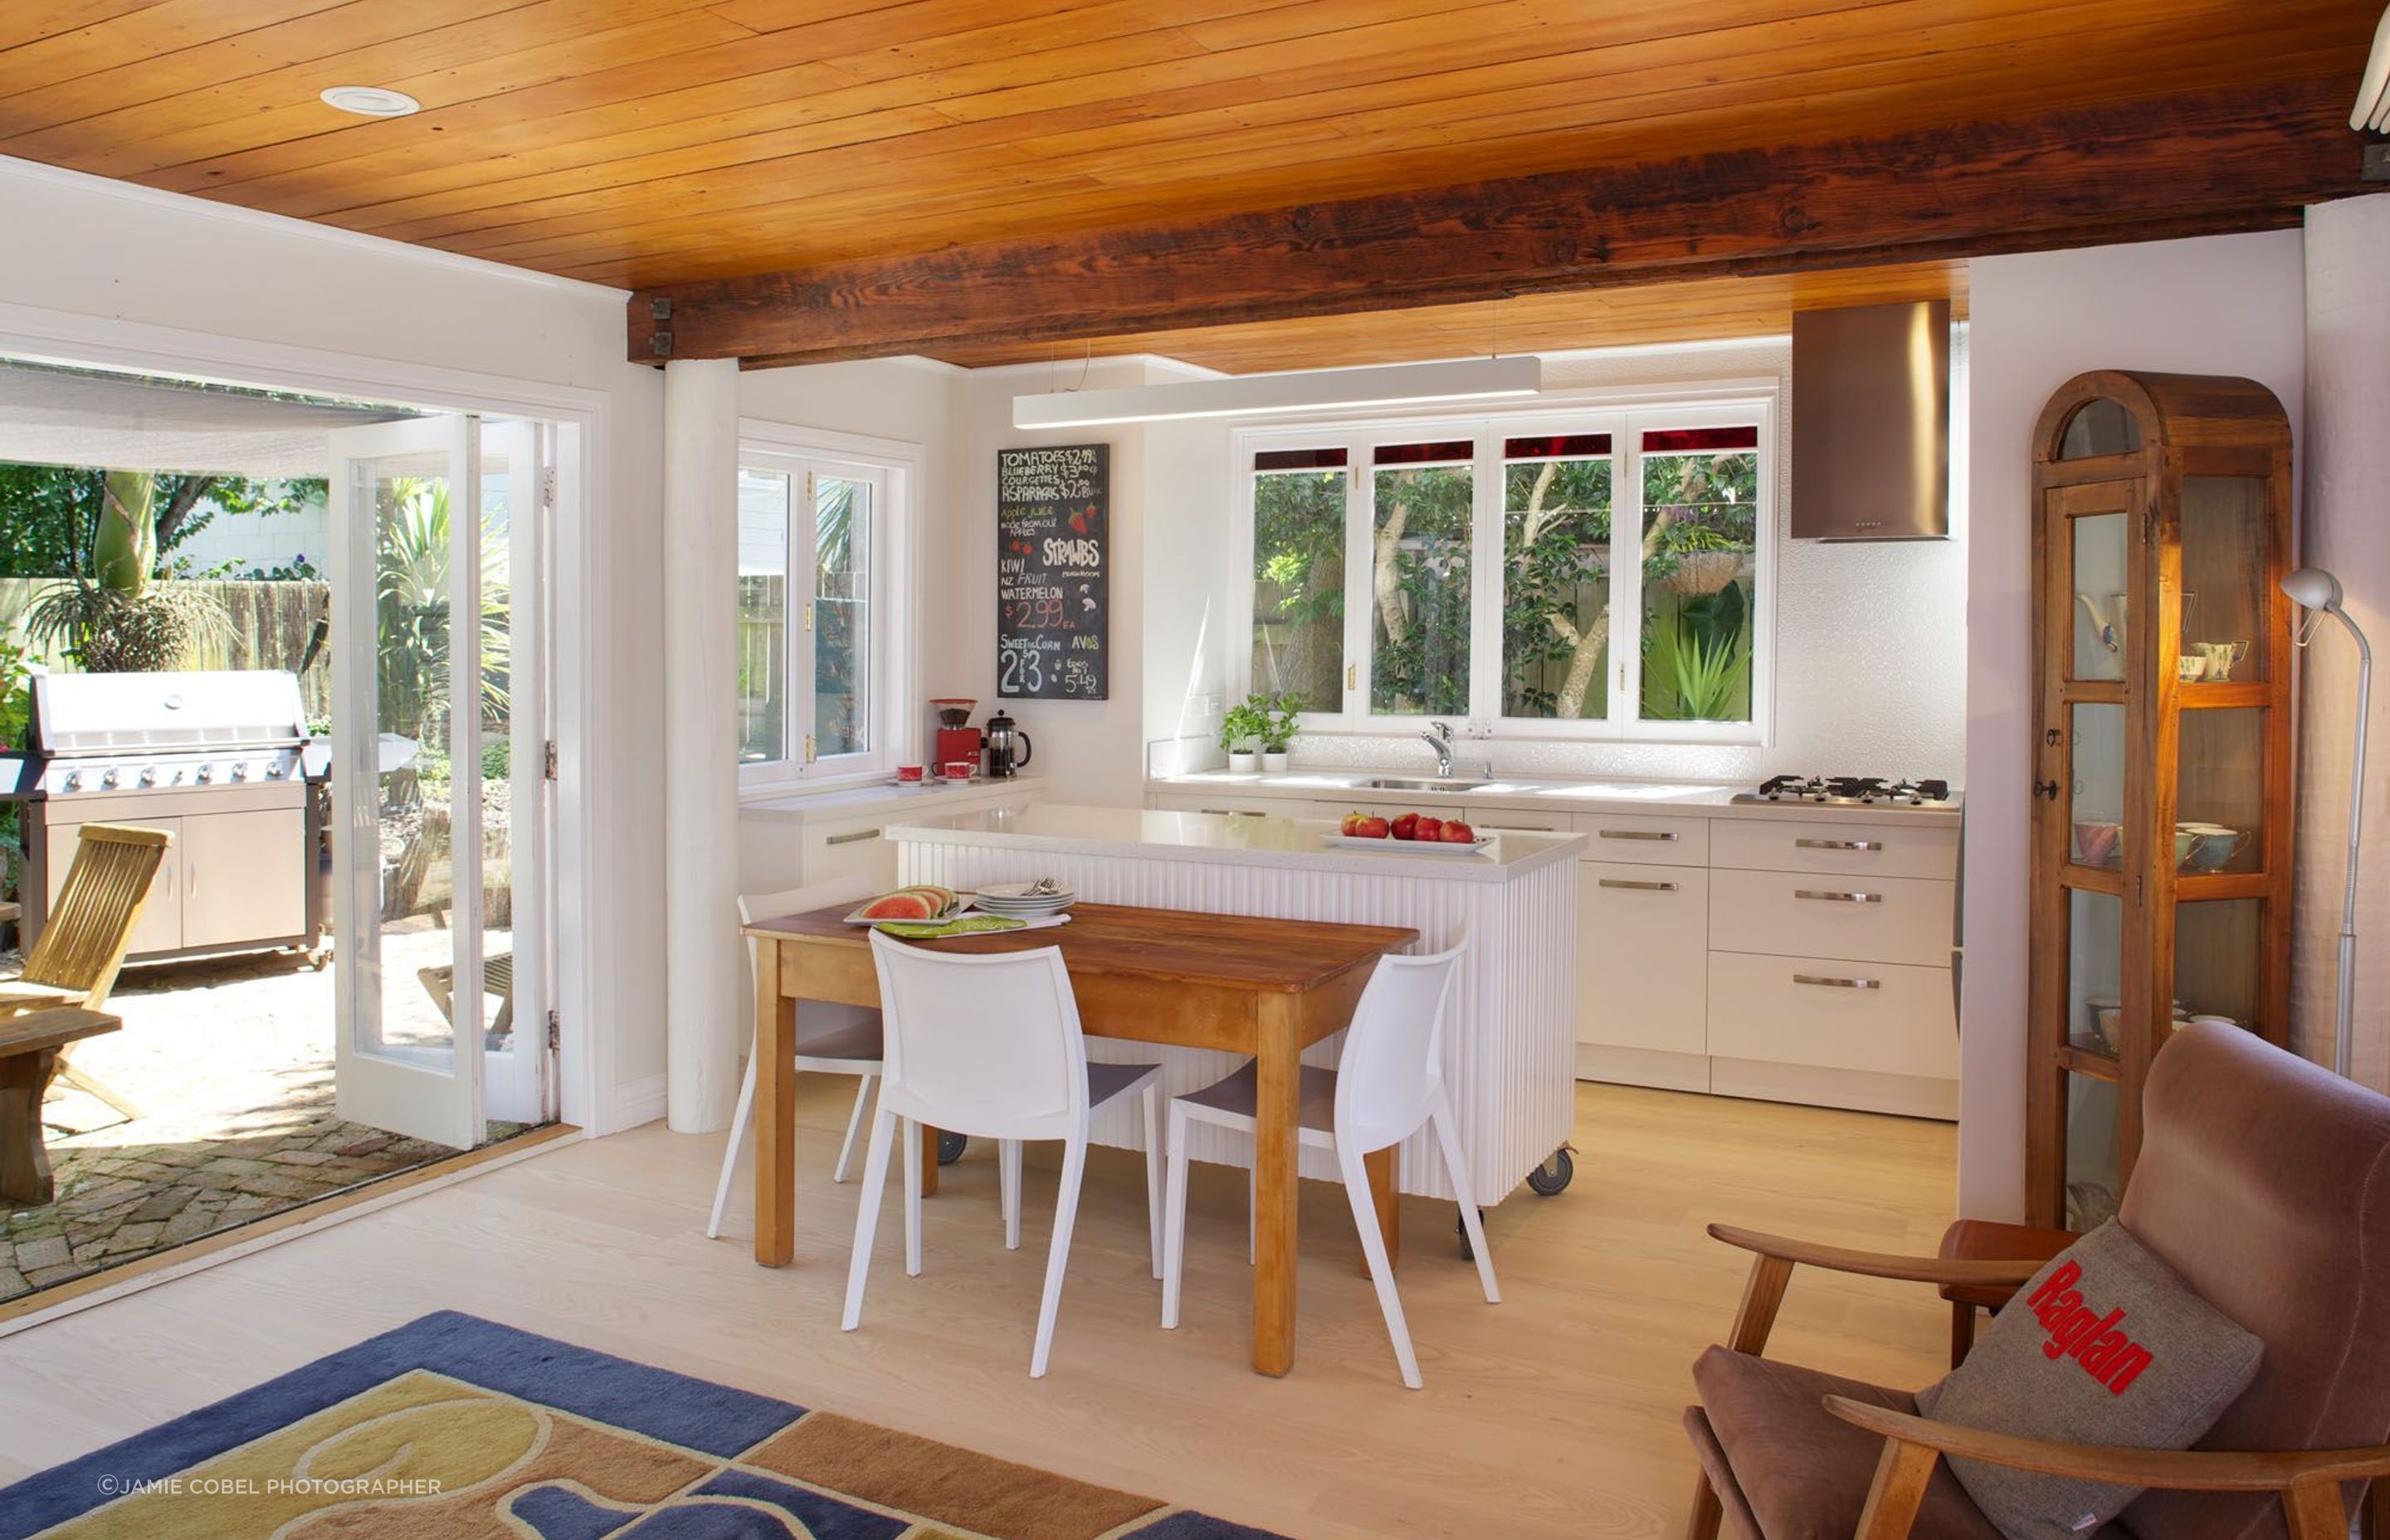 With a low Kauri ceiling forming the floor above, cabinetry and flooring is kept light to give the kitchen the aspired open and bright feel.